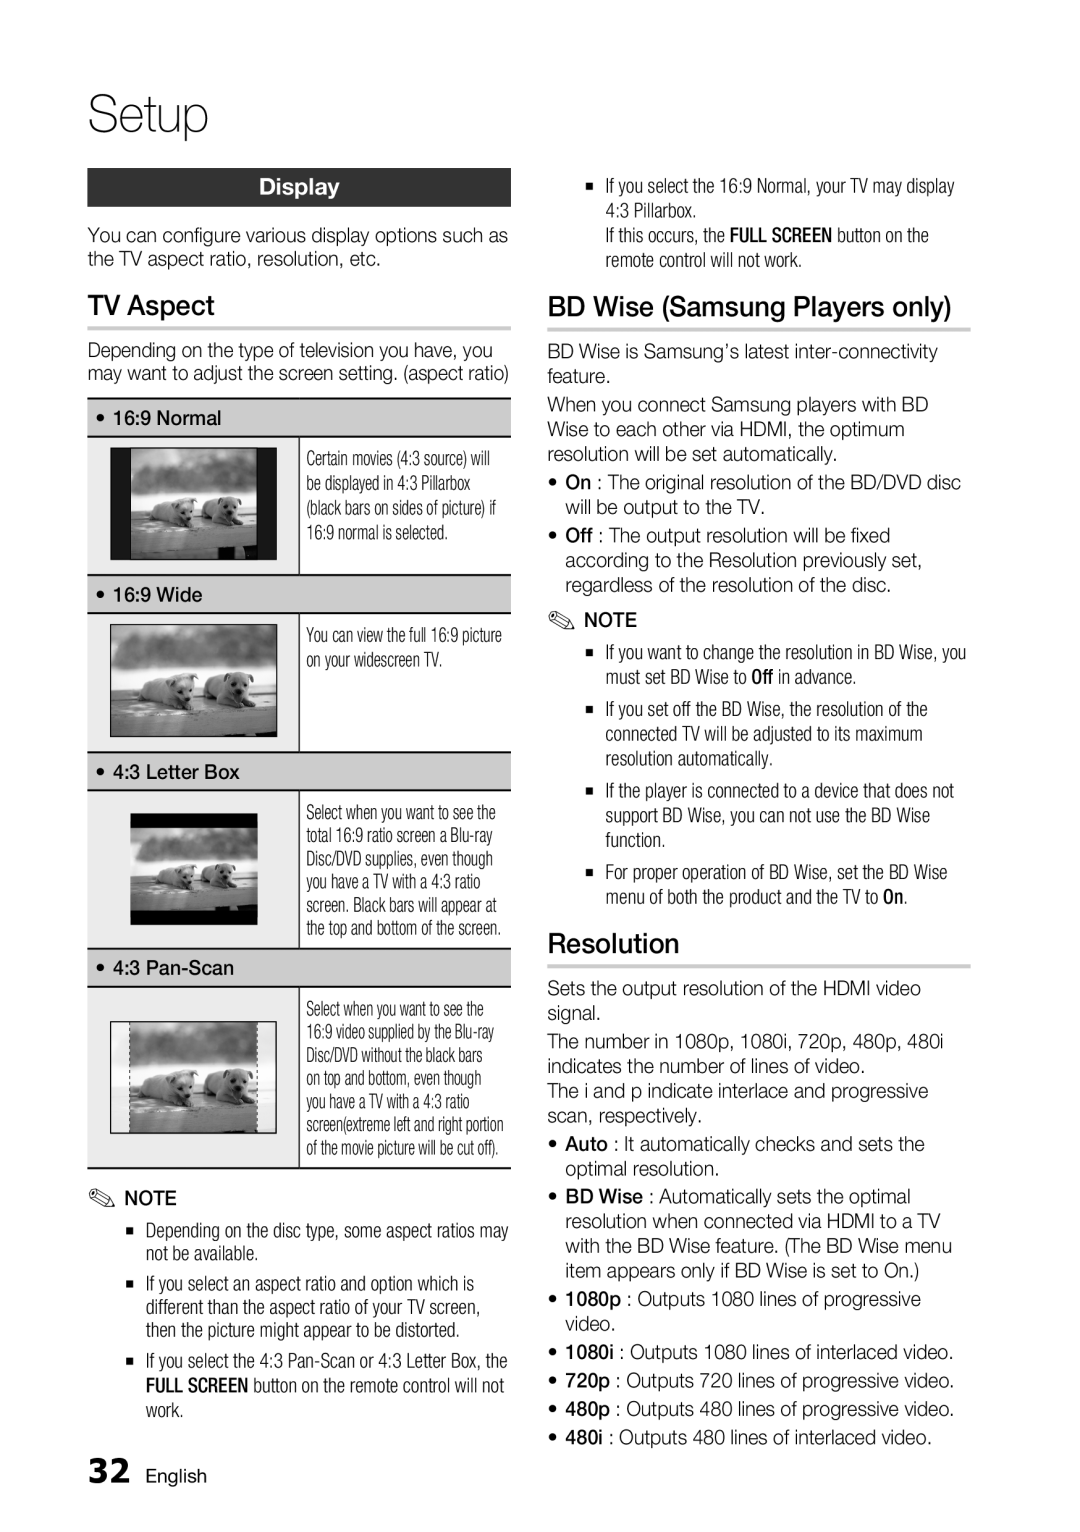 Samsung BD-C7500 user manual TV Aspect, BD Wise Samsung Players only, Resolution, Display 